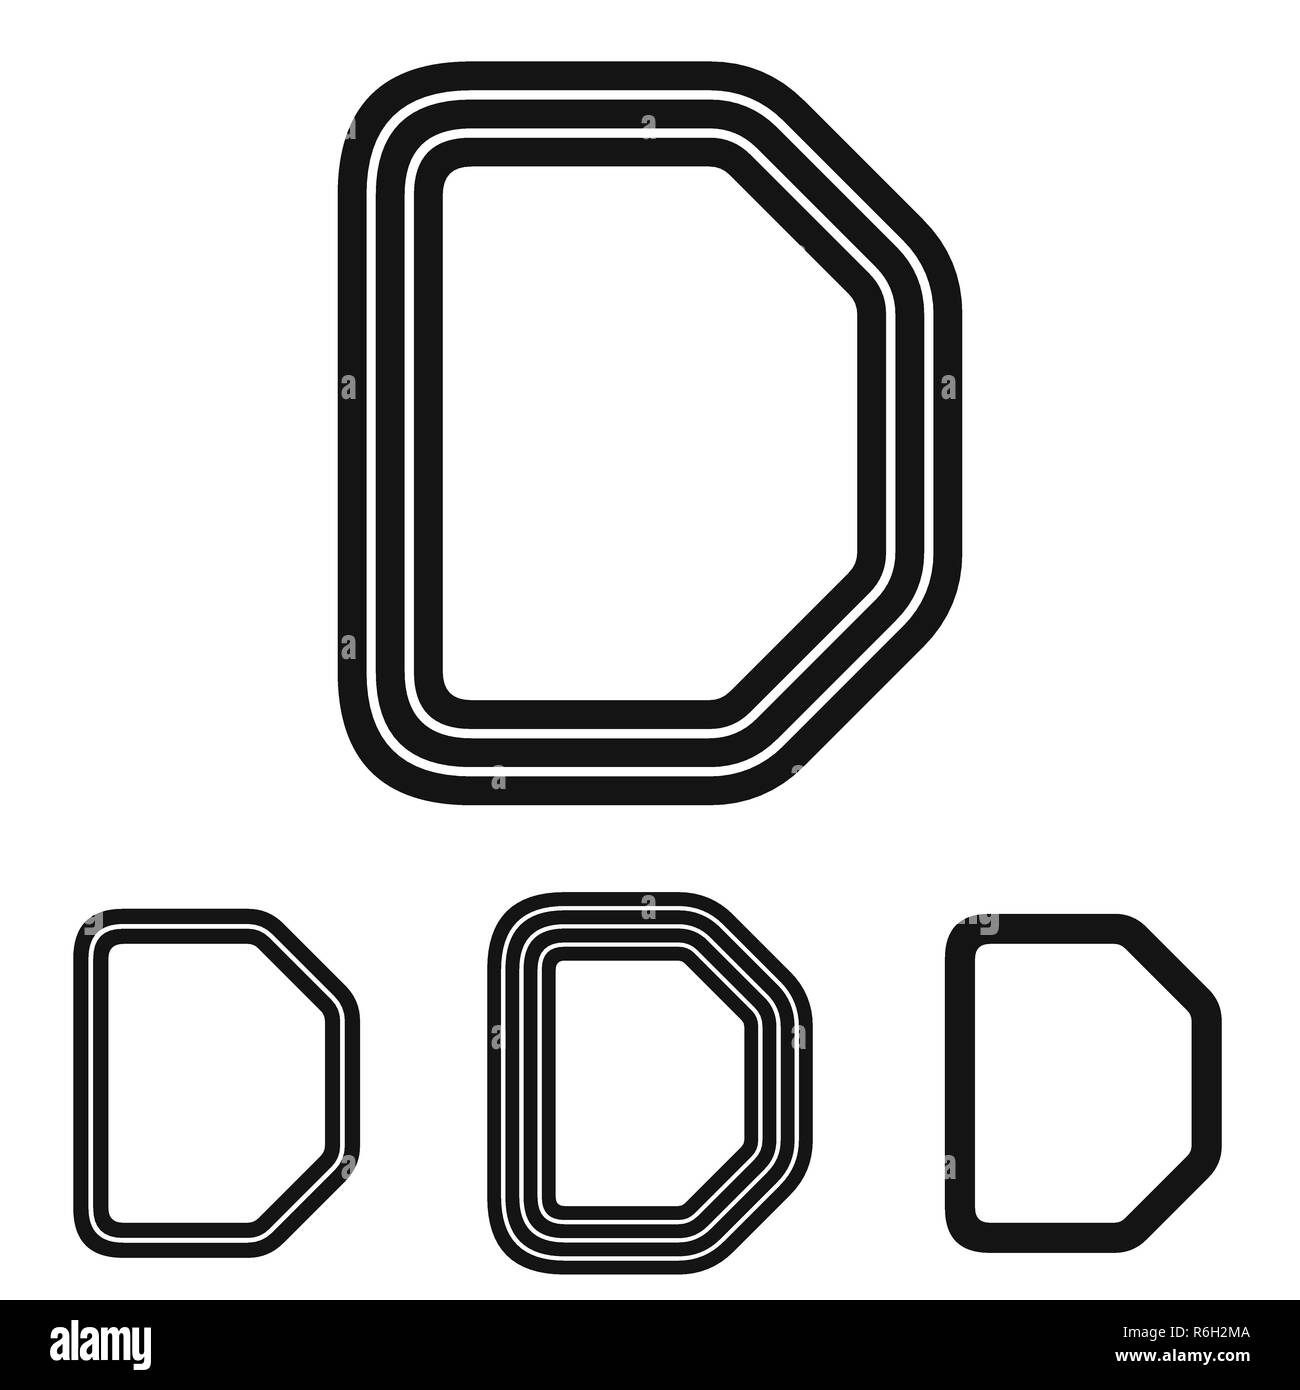 Letter d logo Black and White Stock Photos & Images - Alamy